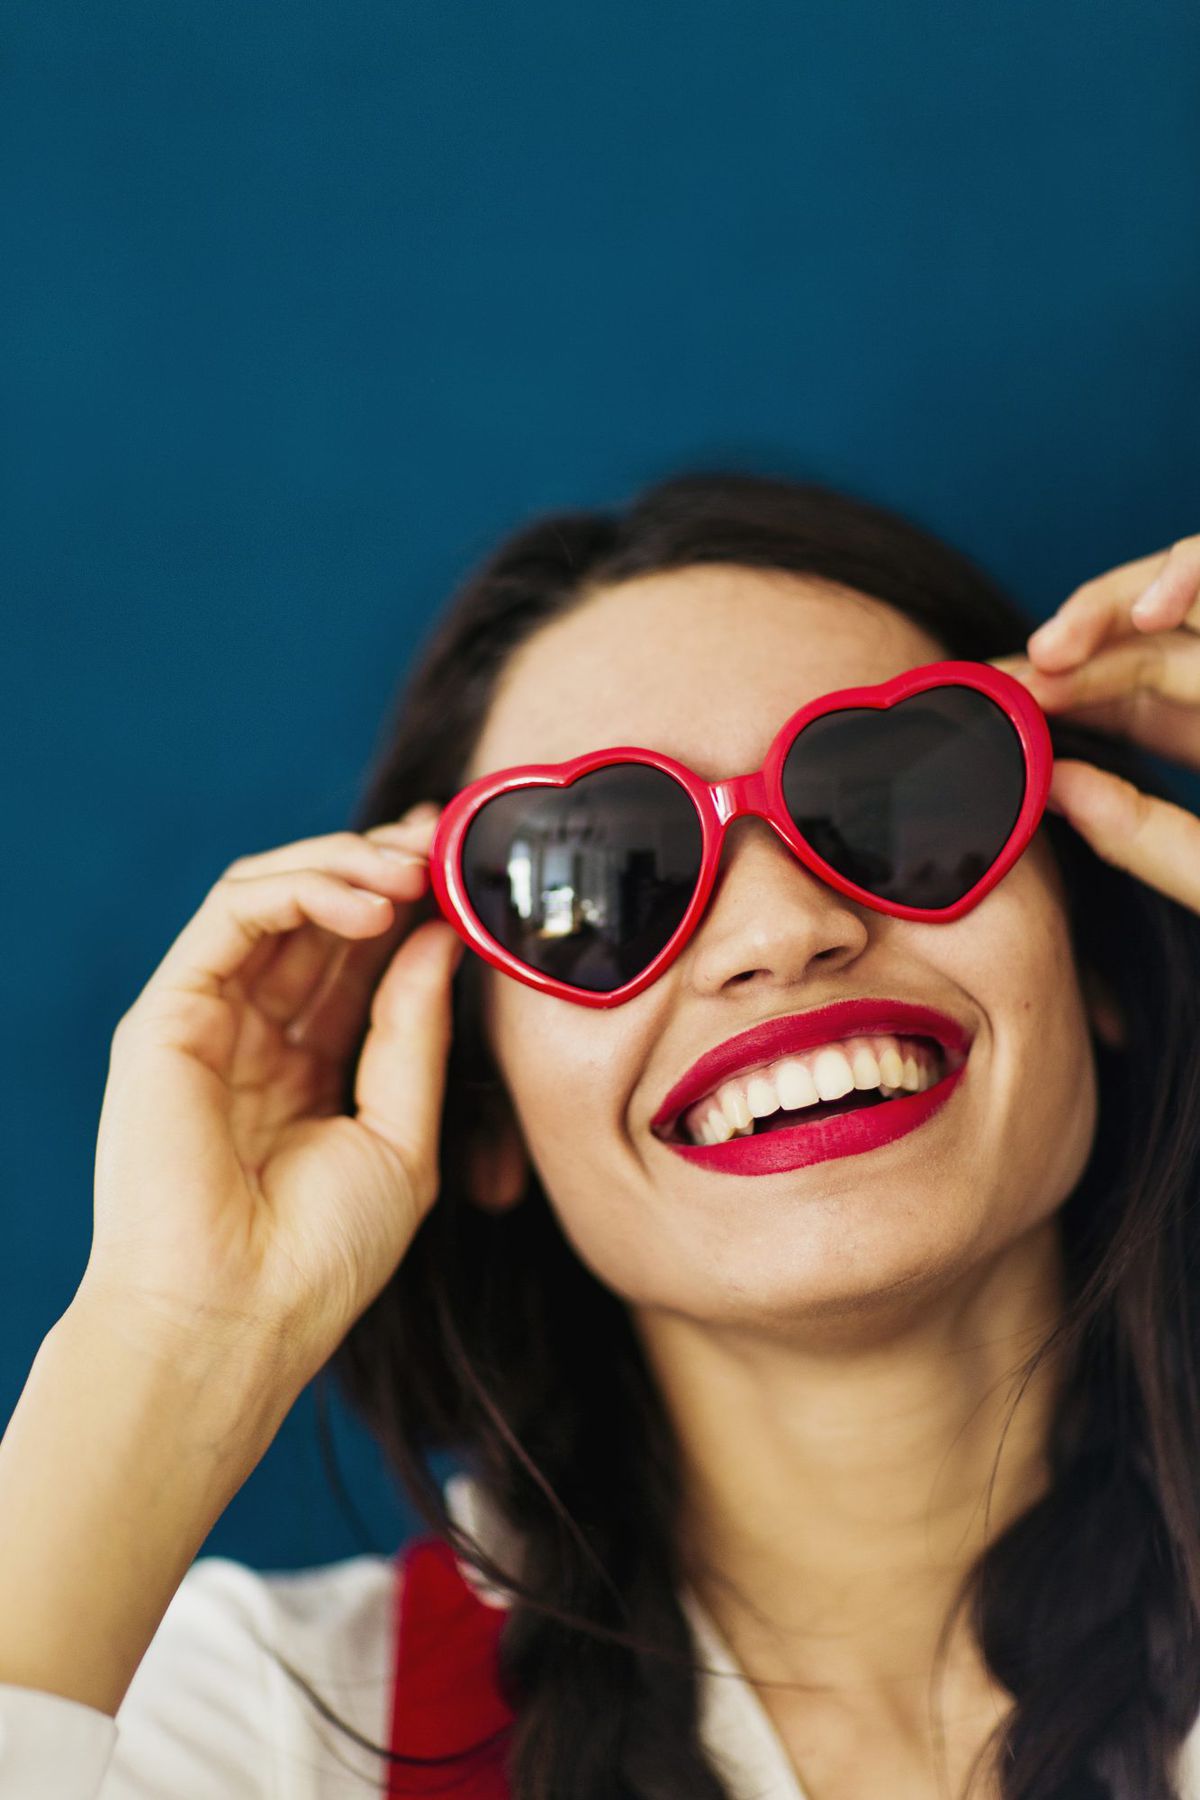 Woman with Red Lipstick and Heart Shaped Sunglasses Smiling